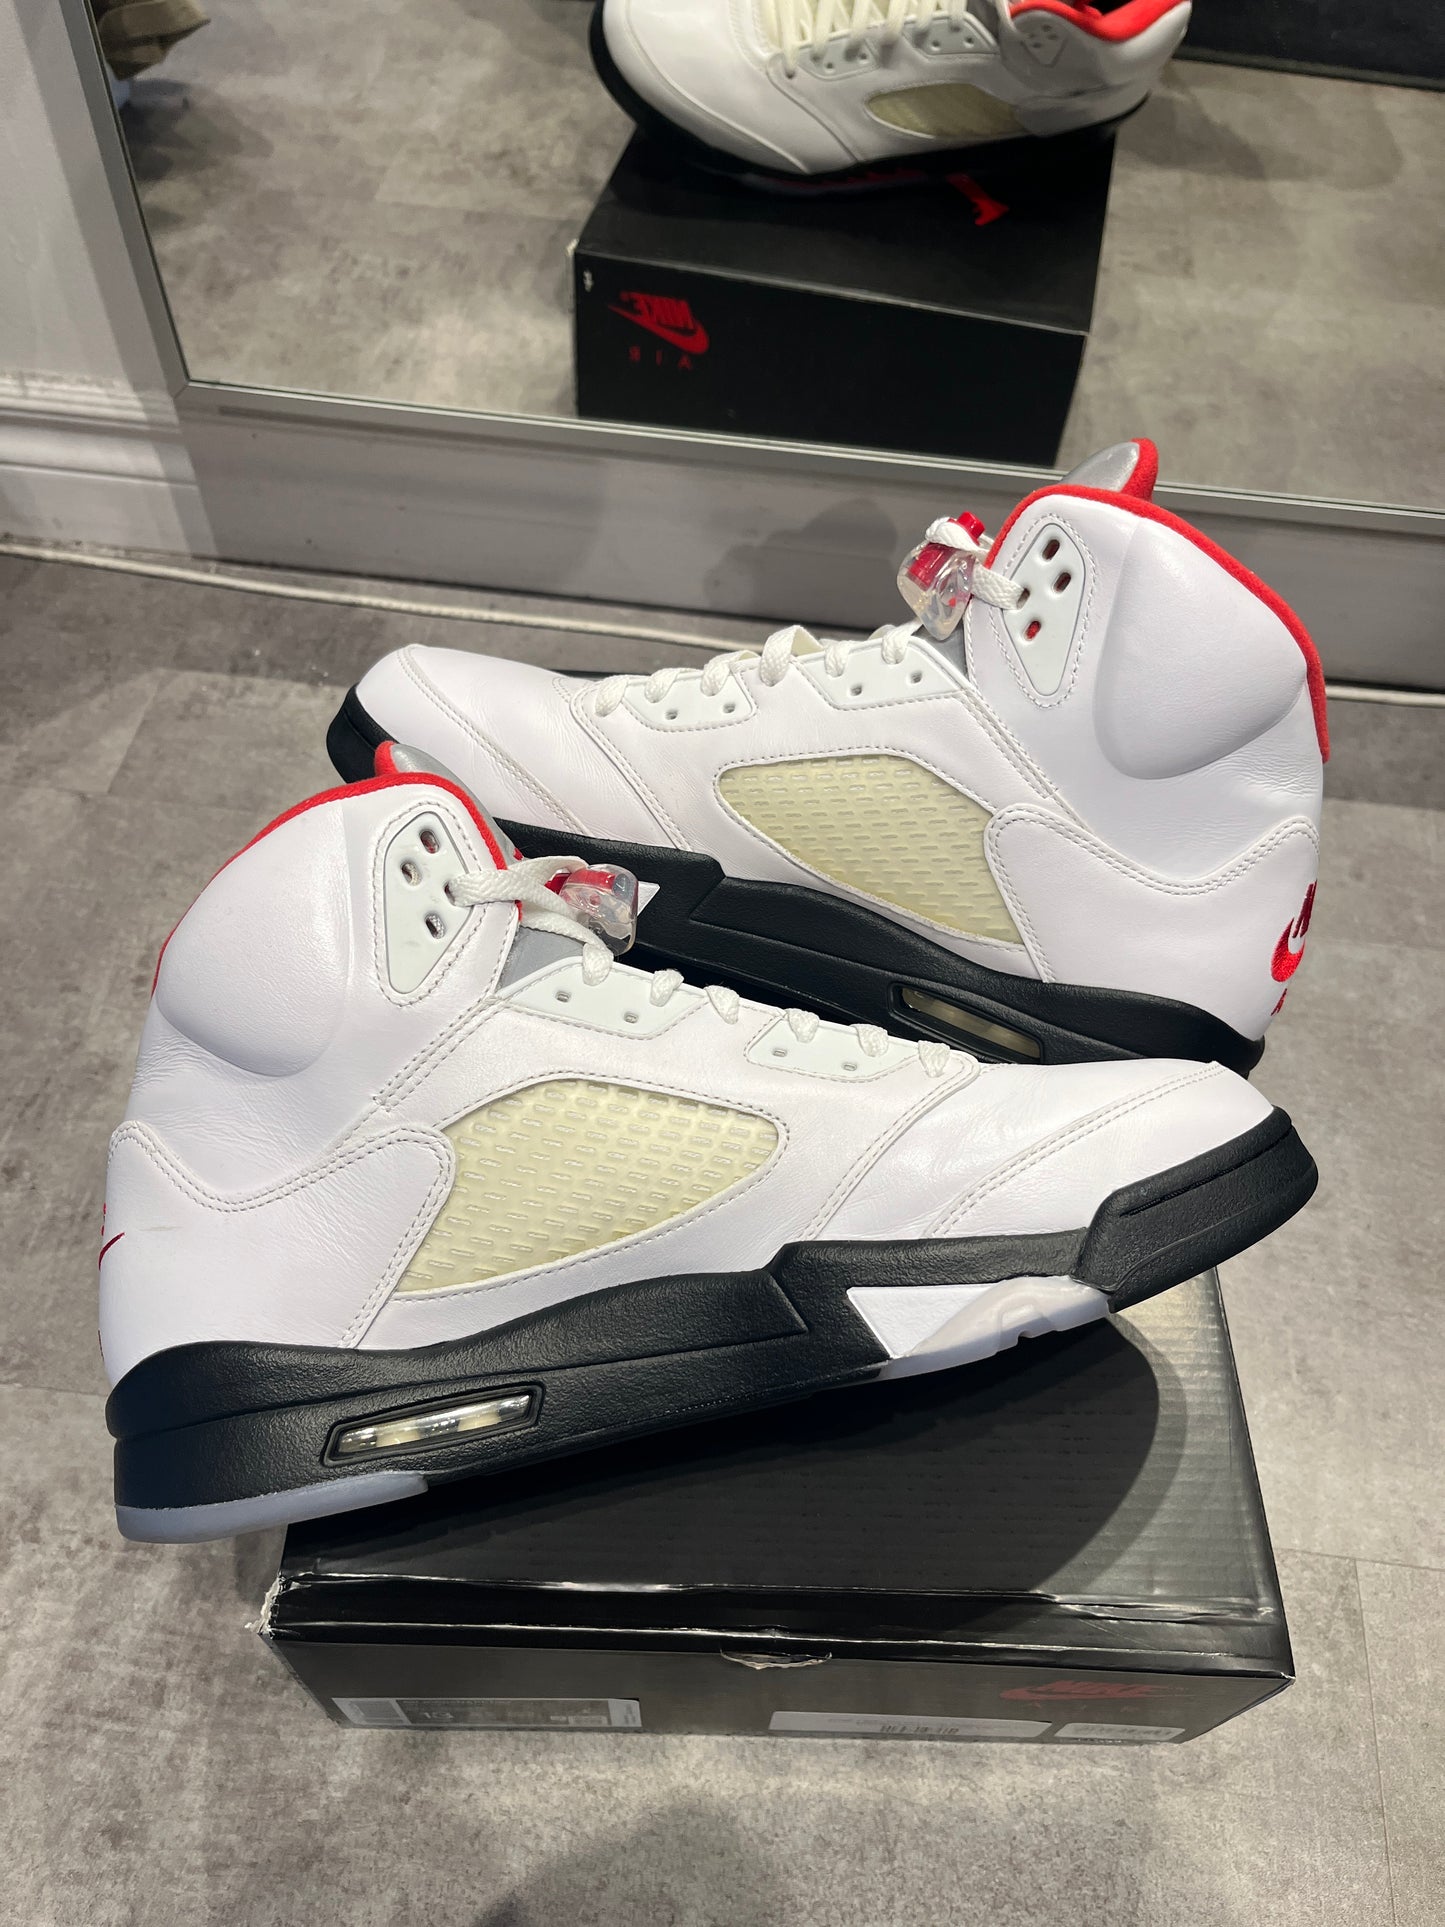 Jordan 5 Retro Fire Red (2020) (Preowned Size 13)